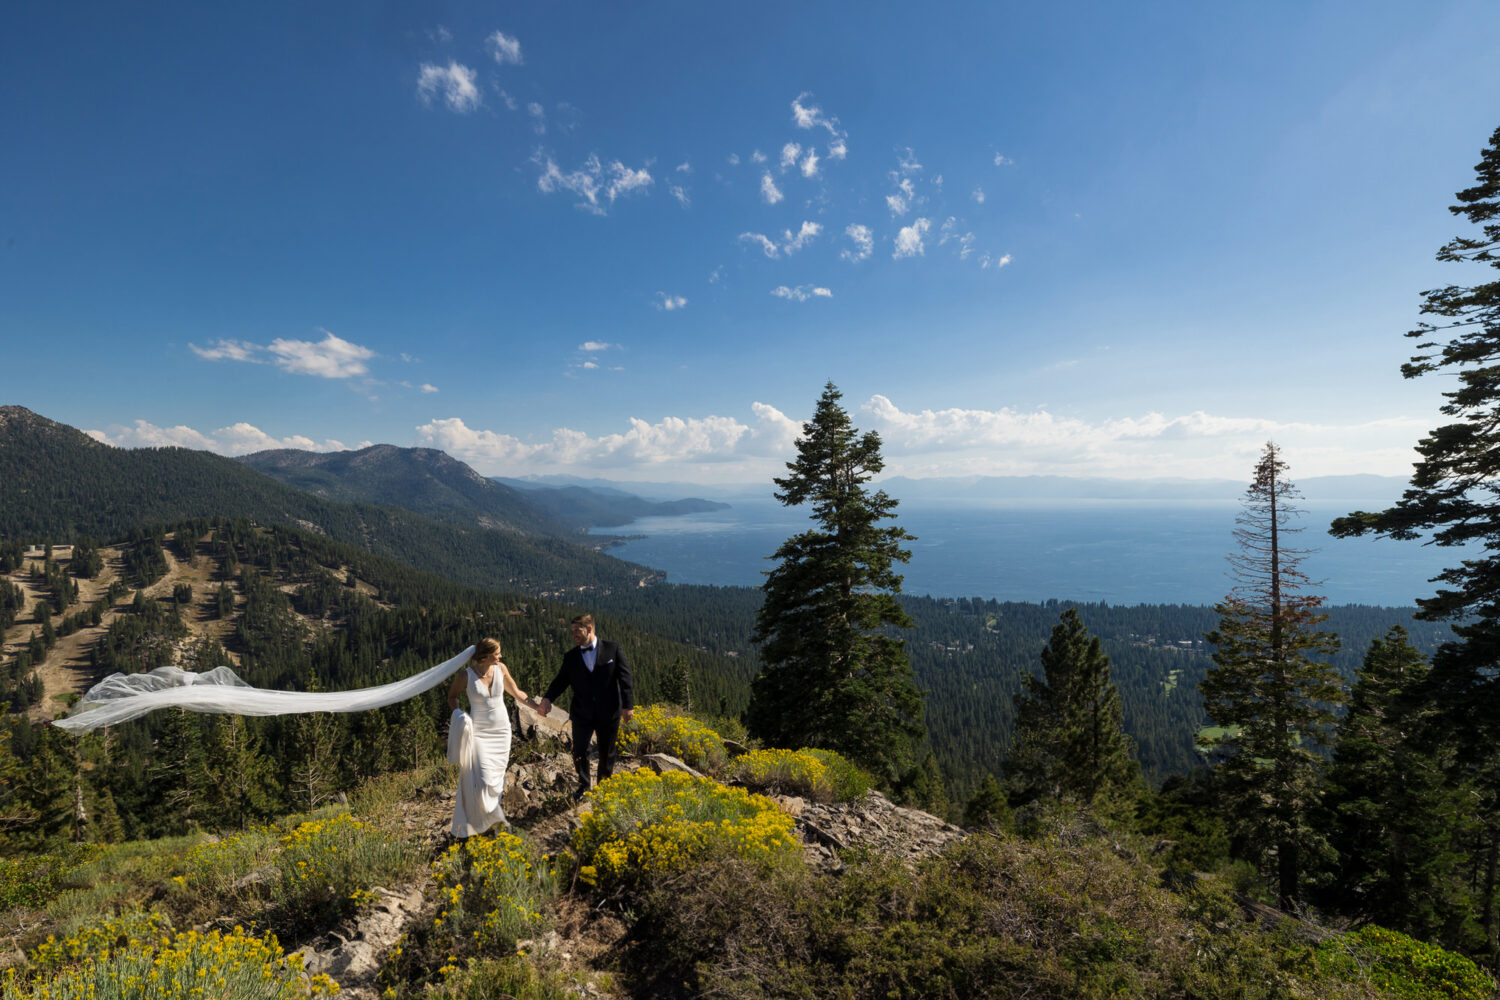 A bride and groom that decided to get married in Incline Village enjoy a romantic walk on a mountain above Lake Tahoe.